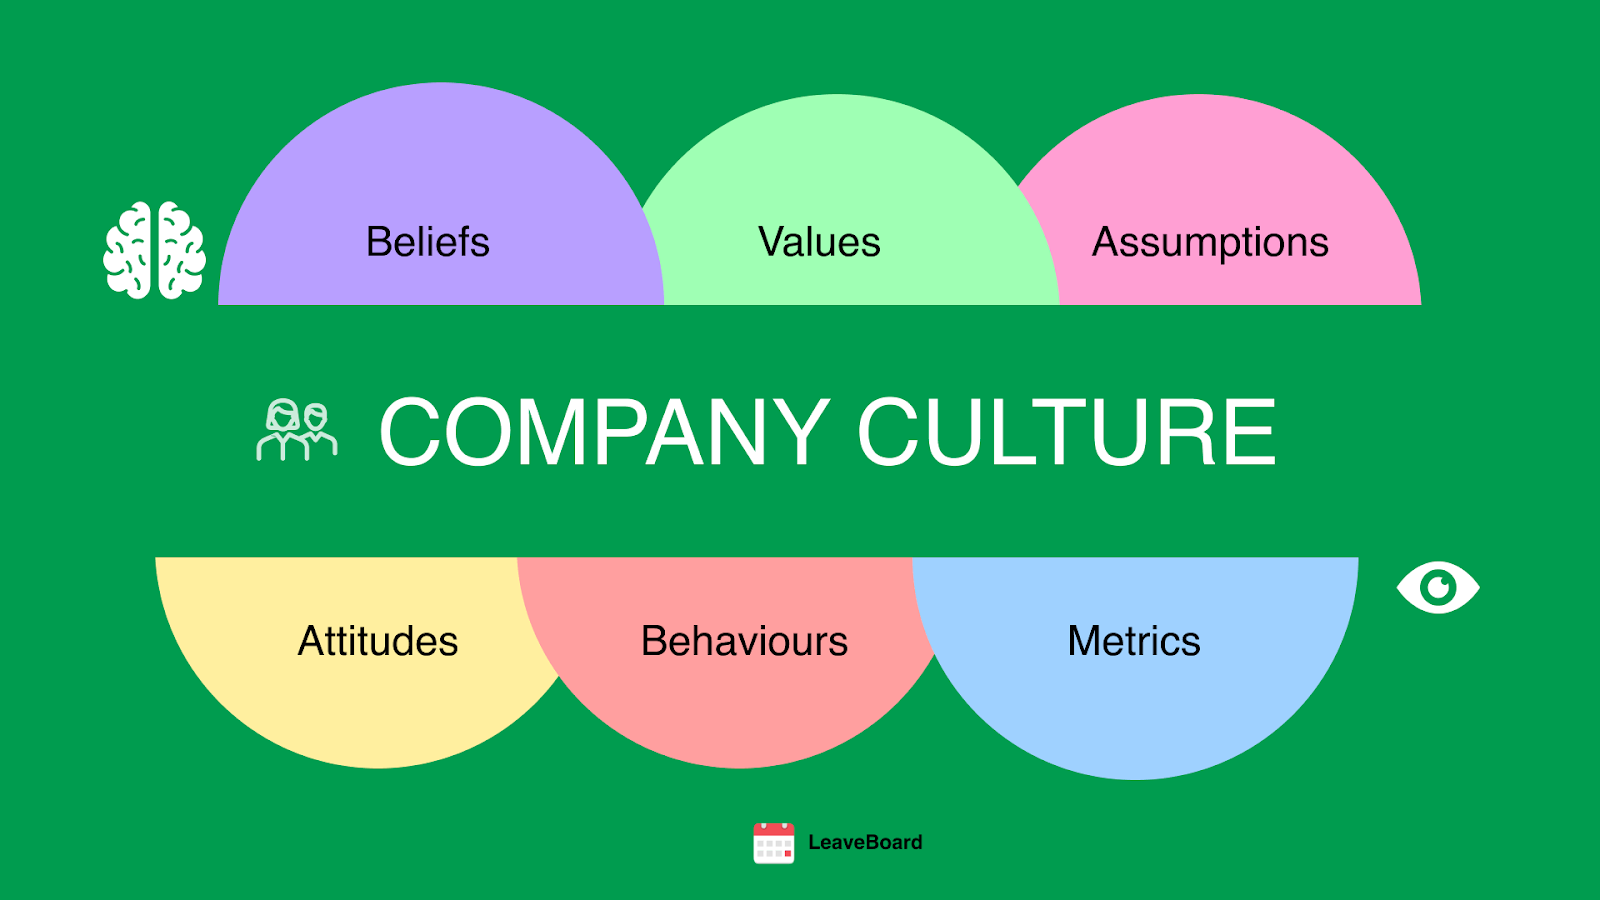 The different aspects that make up a company culture, including: beliefs, values, assumptions, attitudes, behaviours, and metrics. 